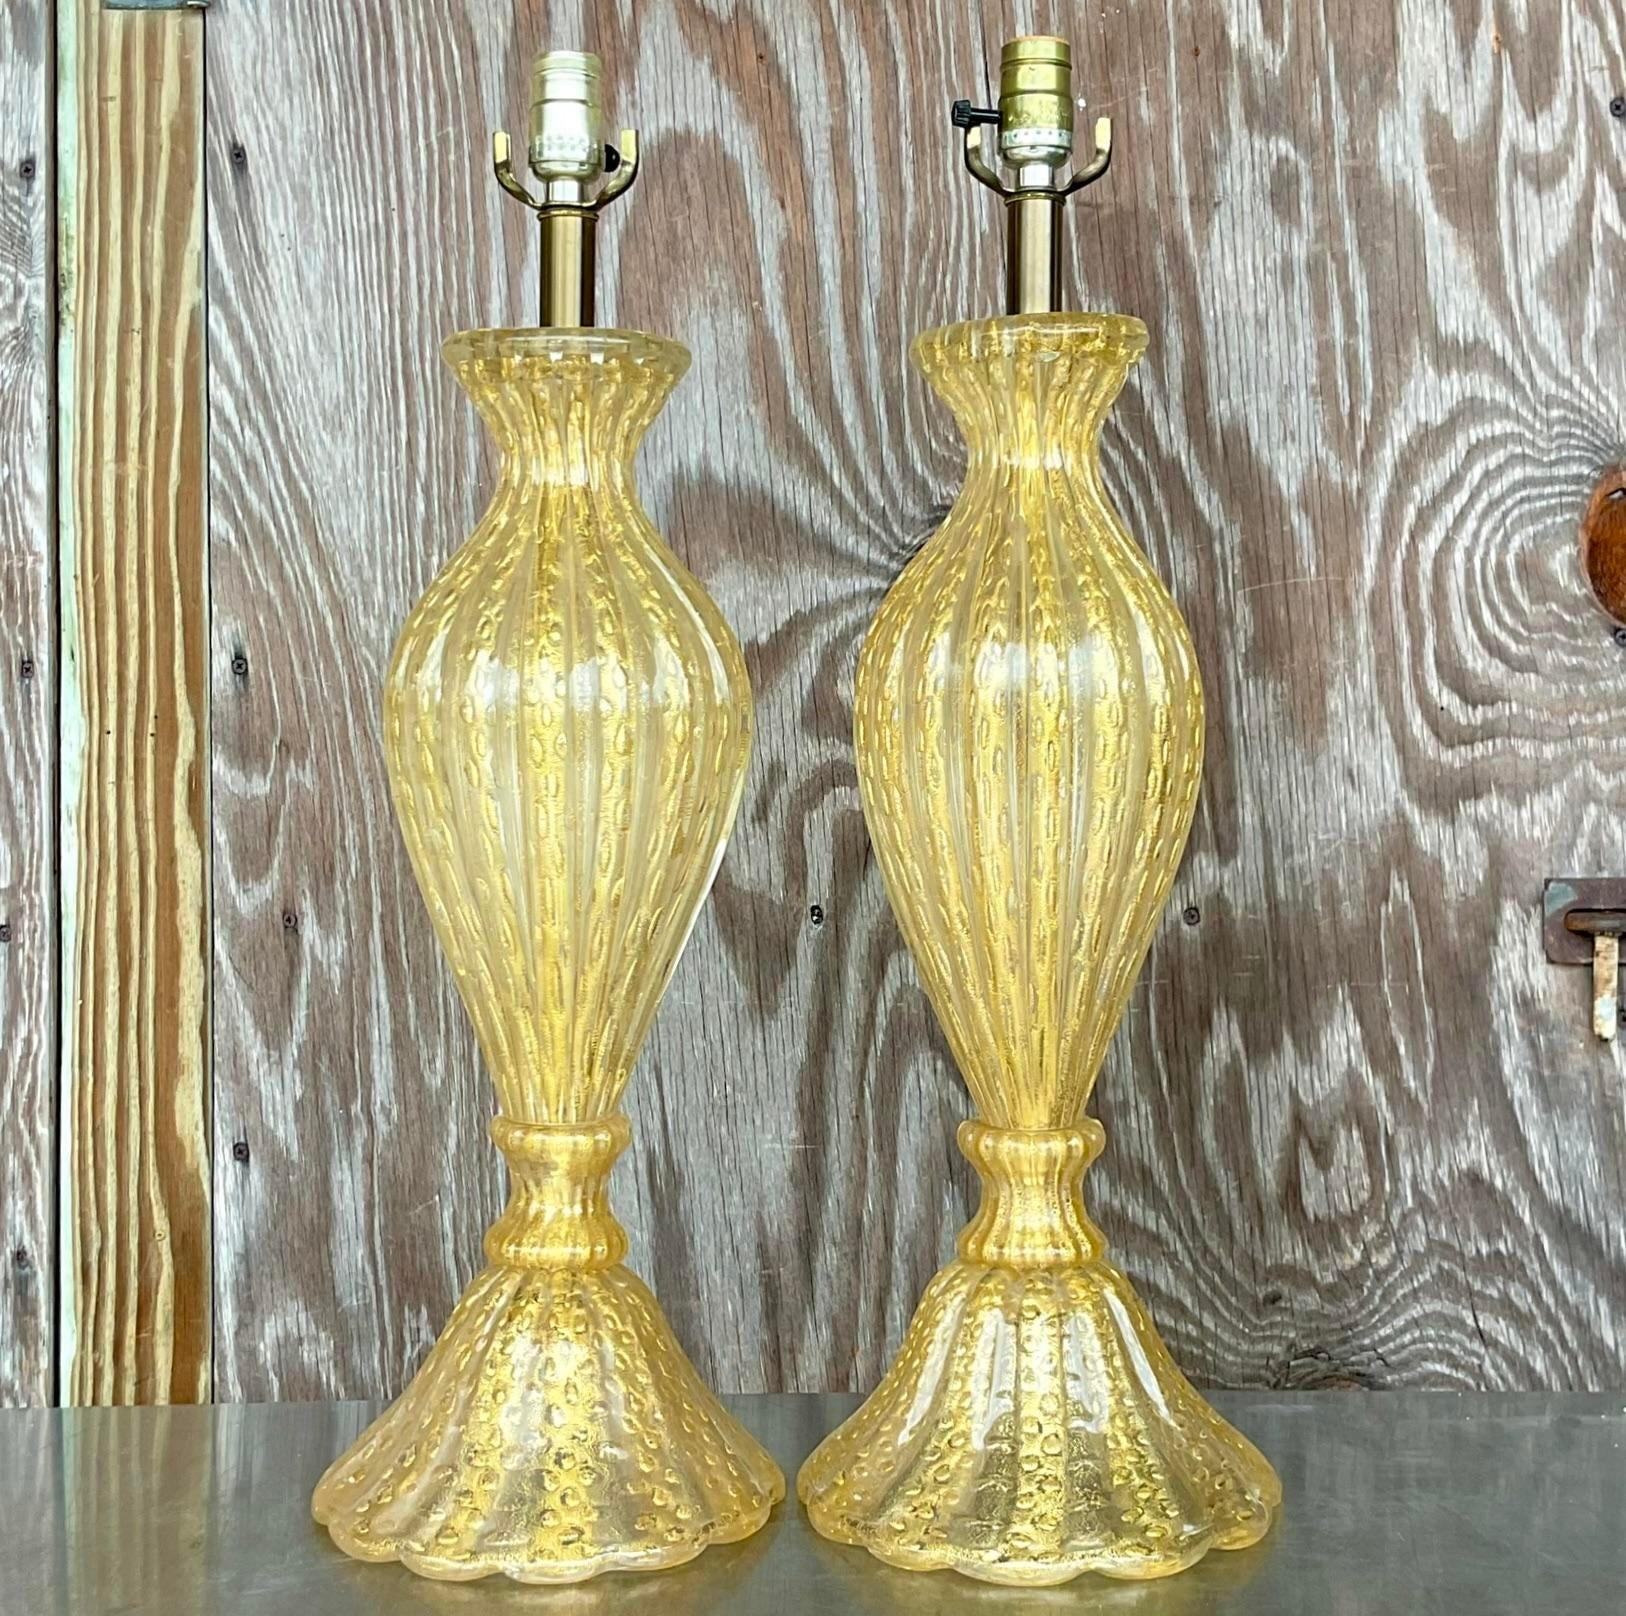 20th Century Vintage Regency Restored Murano Glass Table Lamps - a Pair For Sale